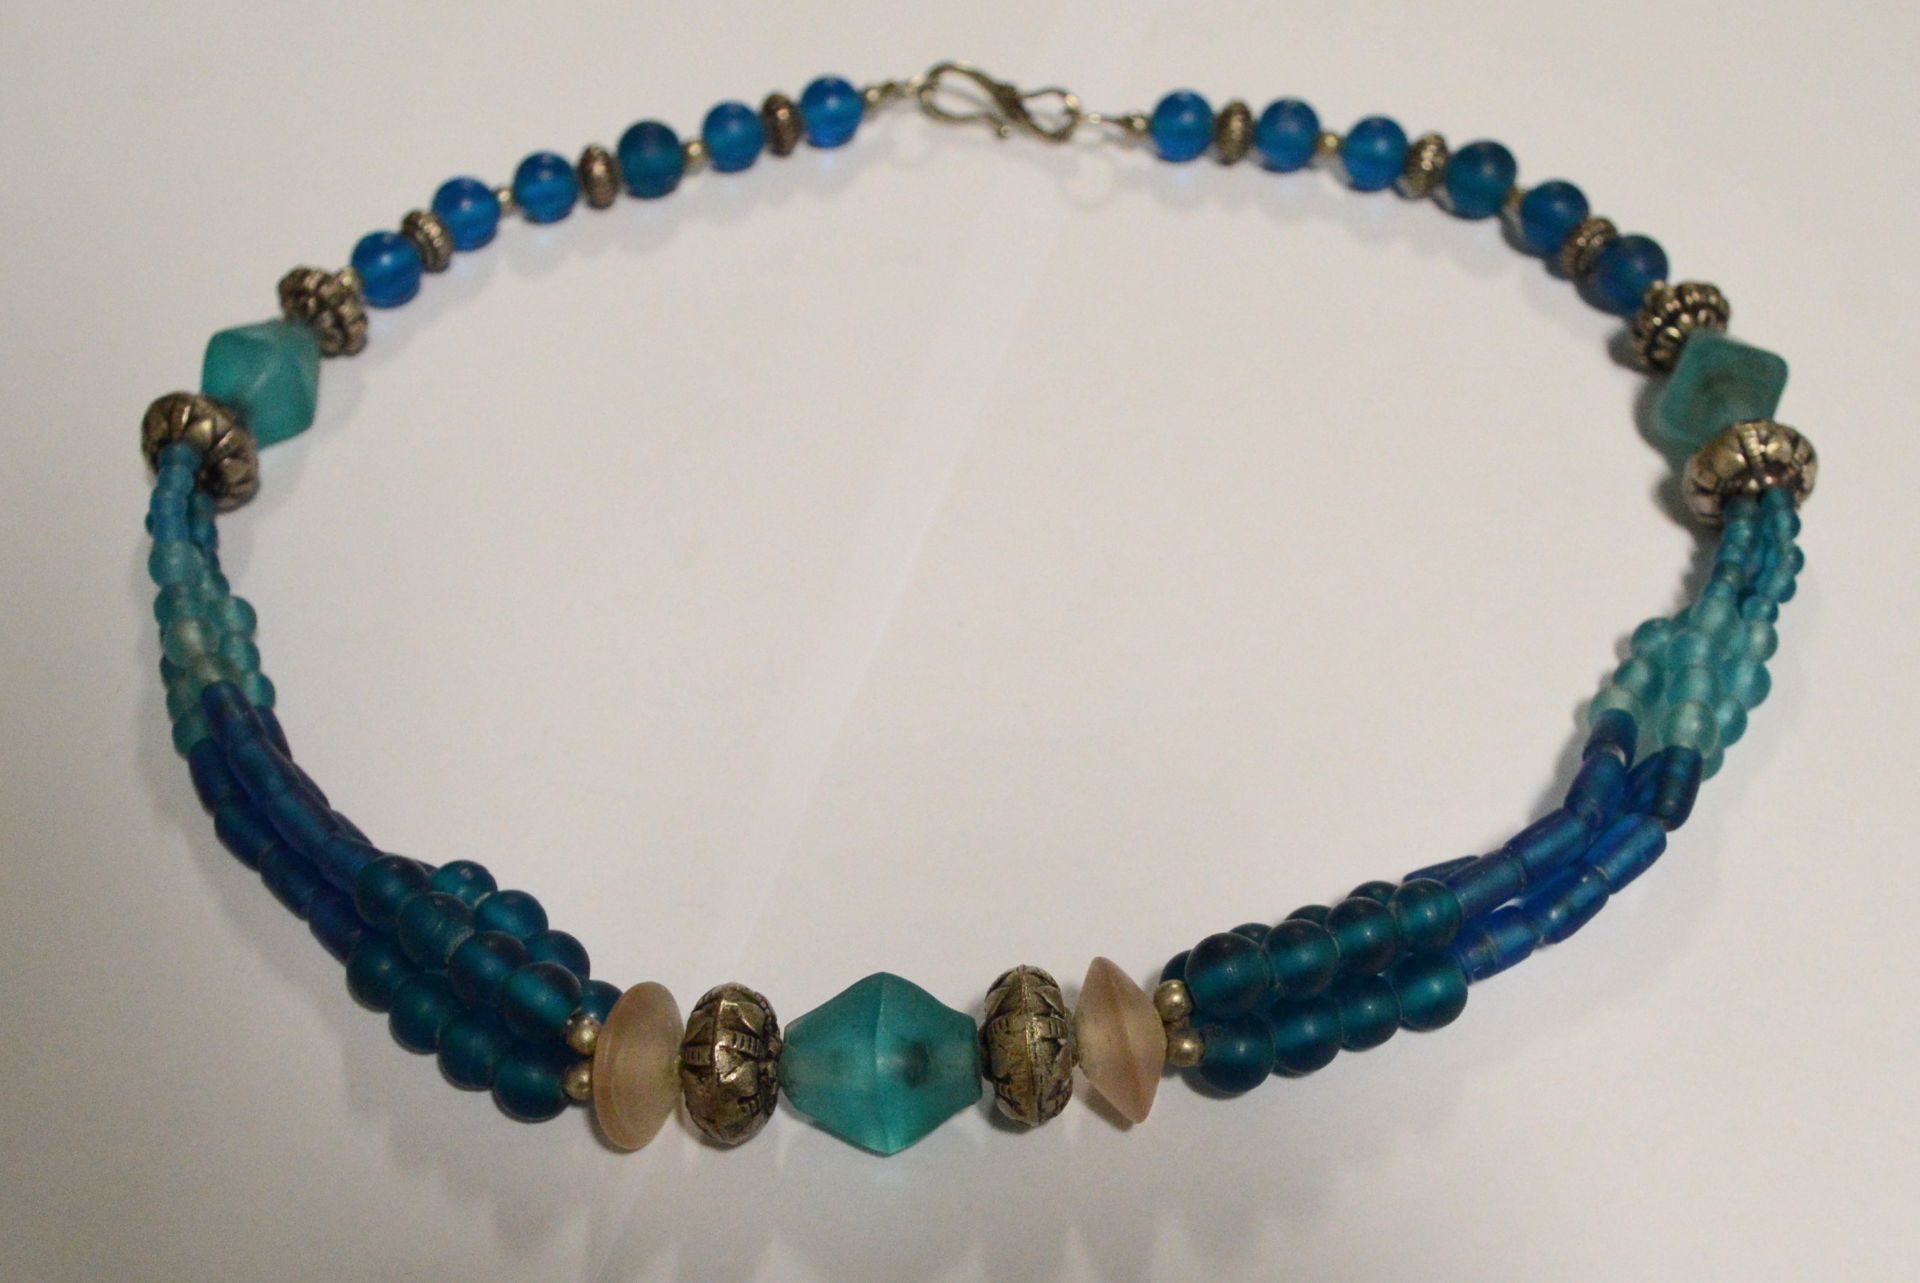 Blue/Silver 3 String Bead Necklace.